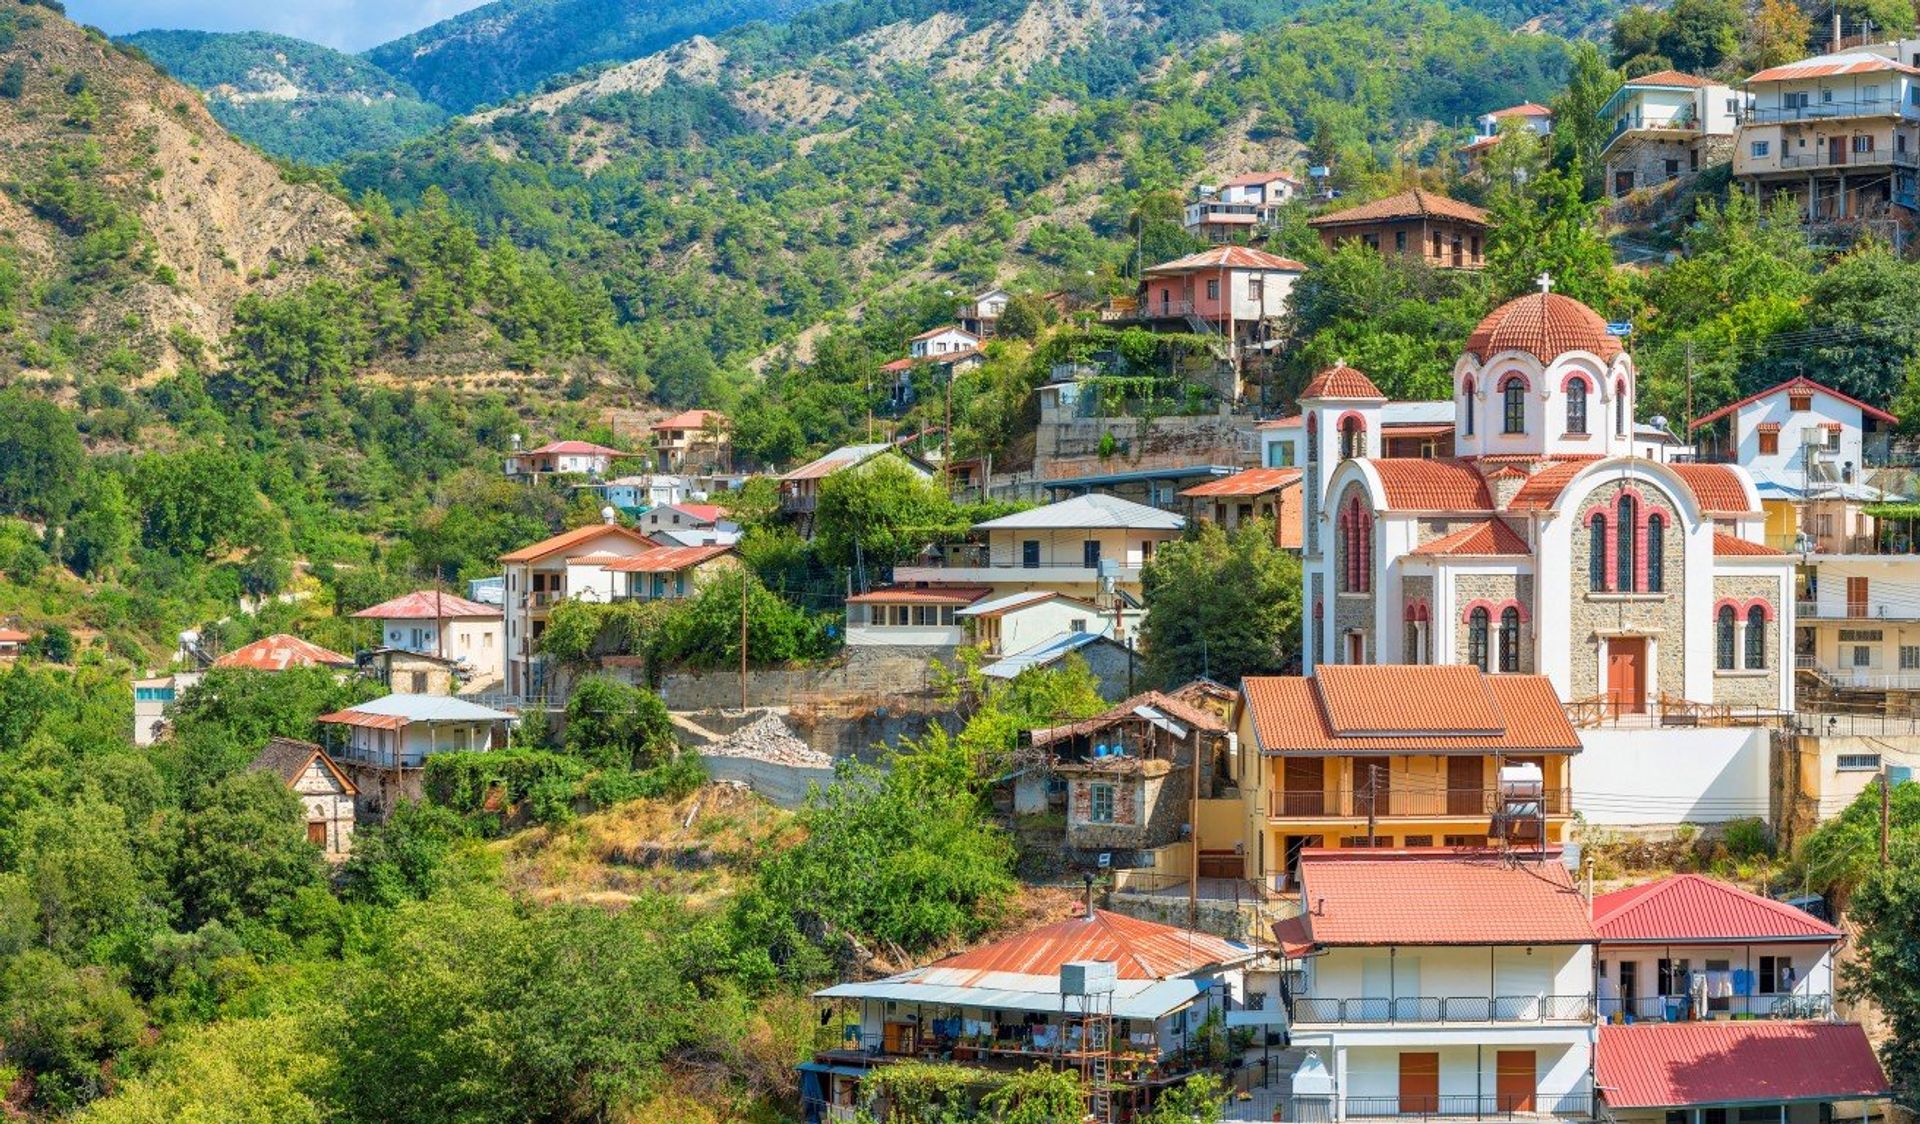 The picturesque mountain village of Moutoullas, Nicosia district